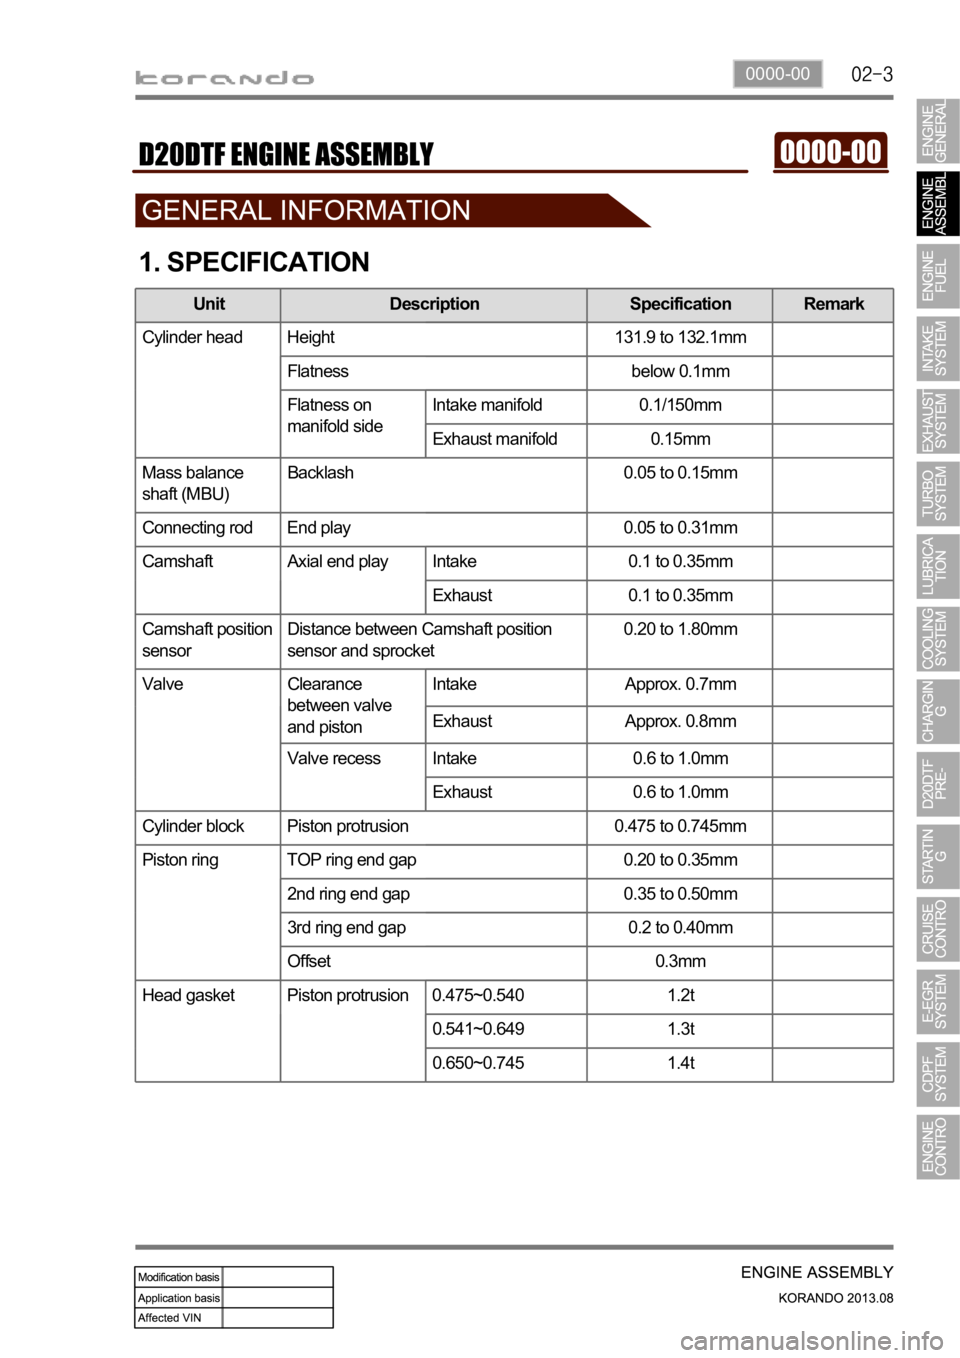 SSANGYONG KORANDO 2013  Service Manual 0000-00
1. SPECIFICATION
Unit Description Specification Remark
Cylinder head Height 131.9 to 132.1mm
Flatness below 0.1mm
Flatness on 
manifold sideIntake manifold 0.1/150mm
Exhaust manifold 0.15mm
Ma